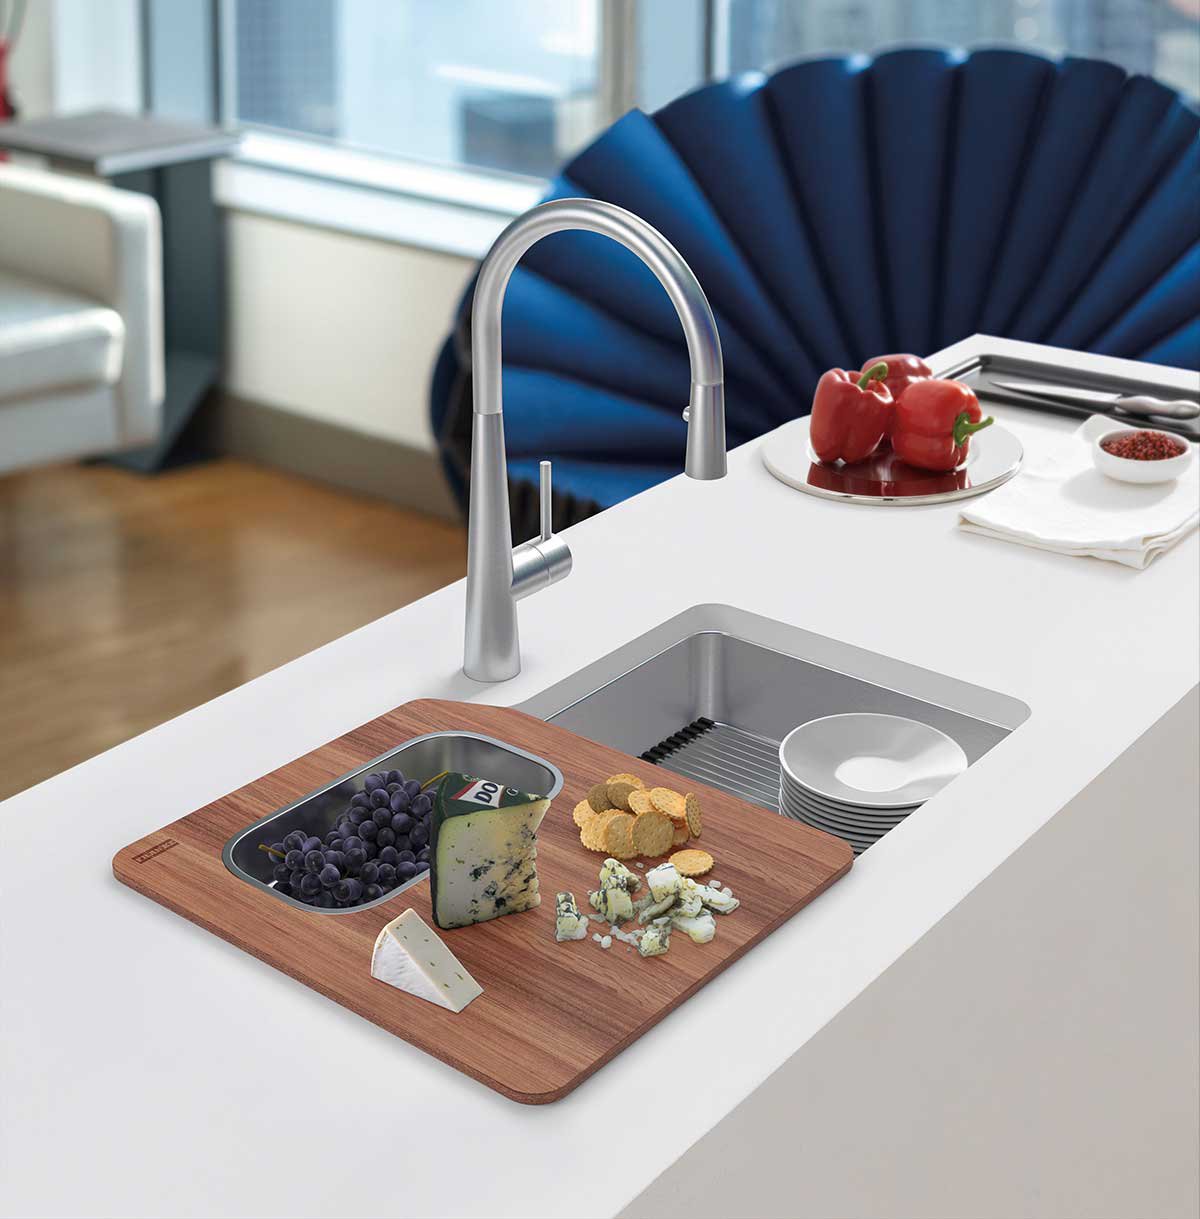 Single bowl stainless steel kitchen sink with over sink cutting board and shelf roller mat in a large kitchen island